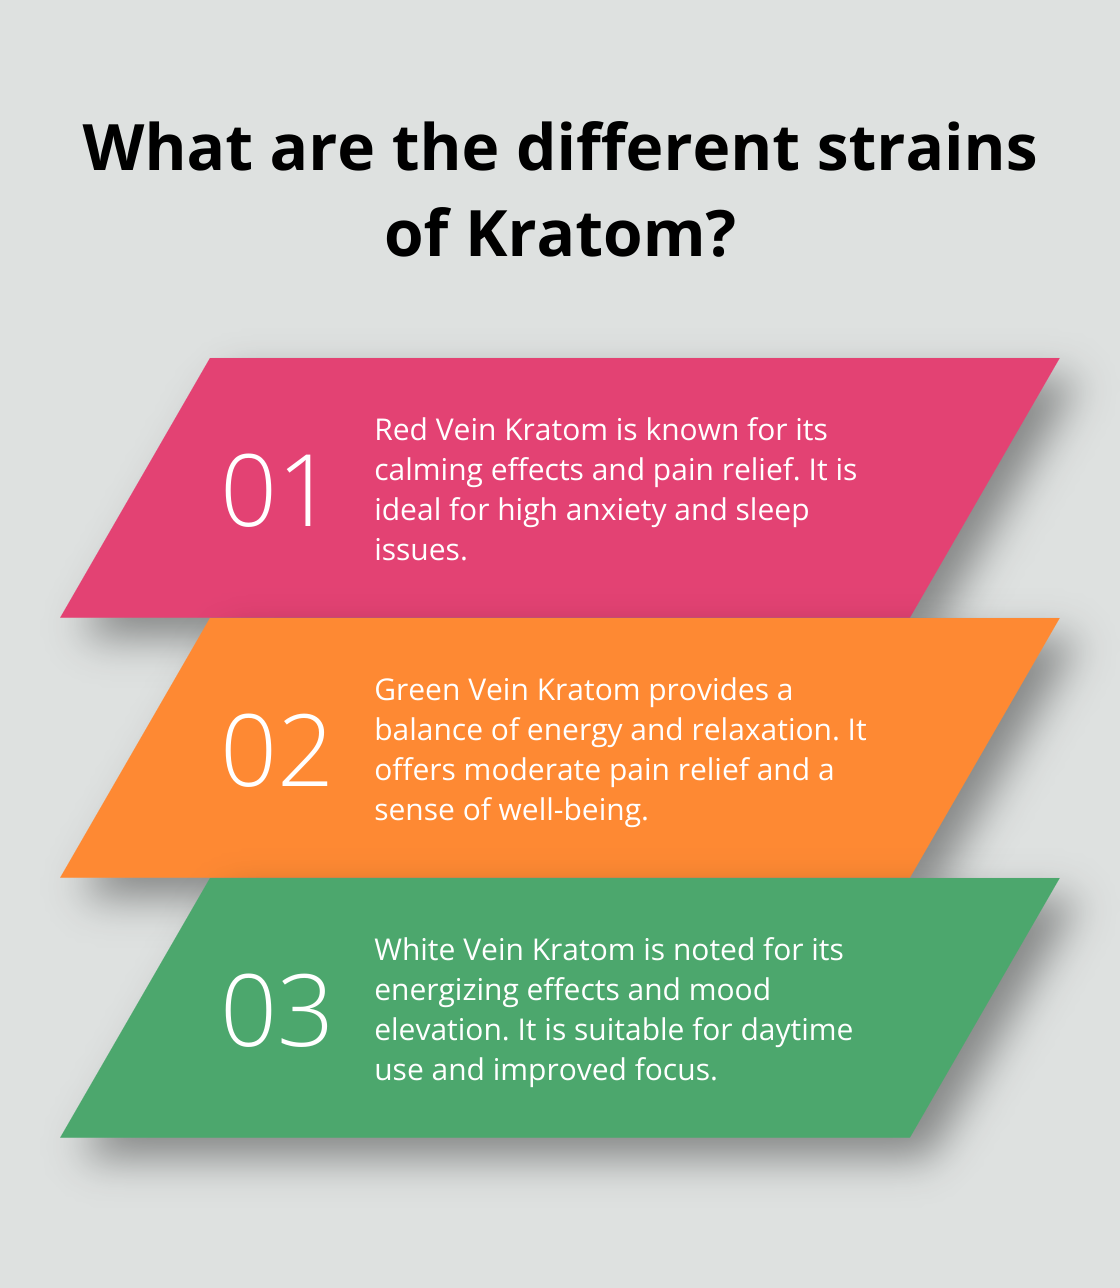 Fact - What are the different strains of Kratom?